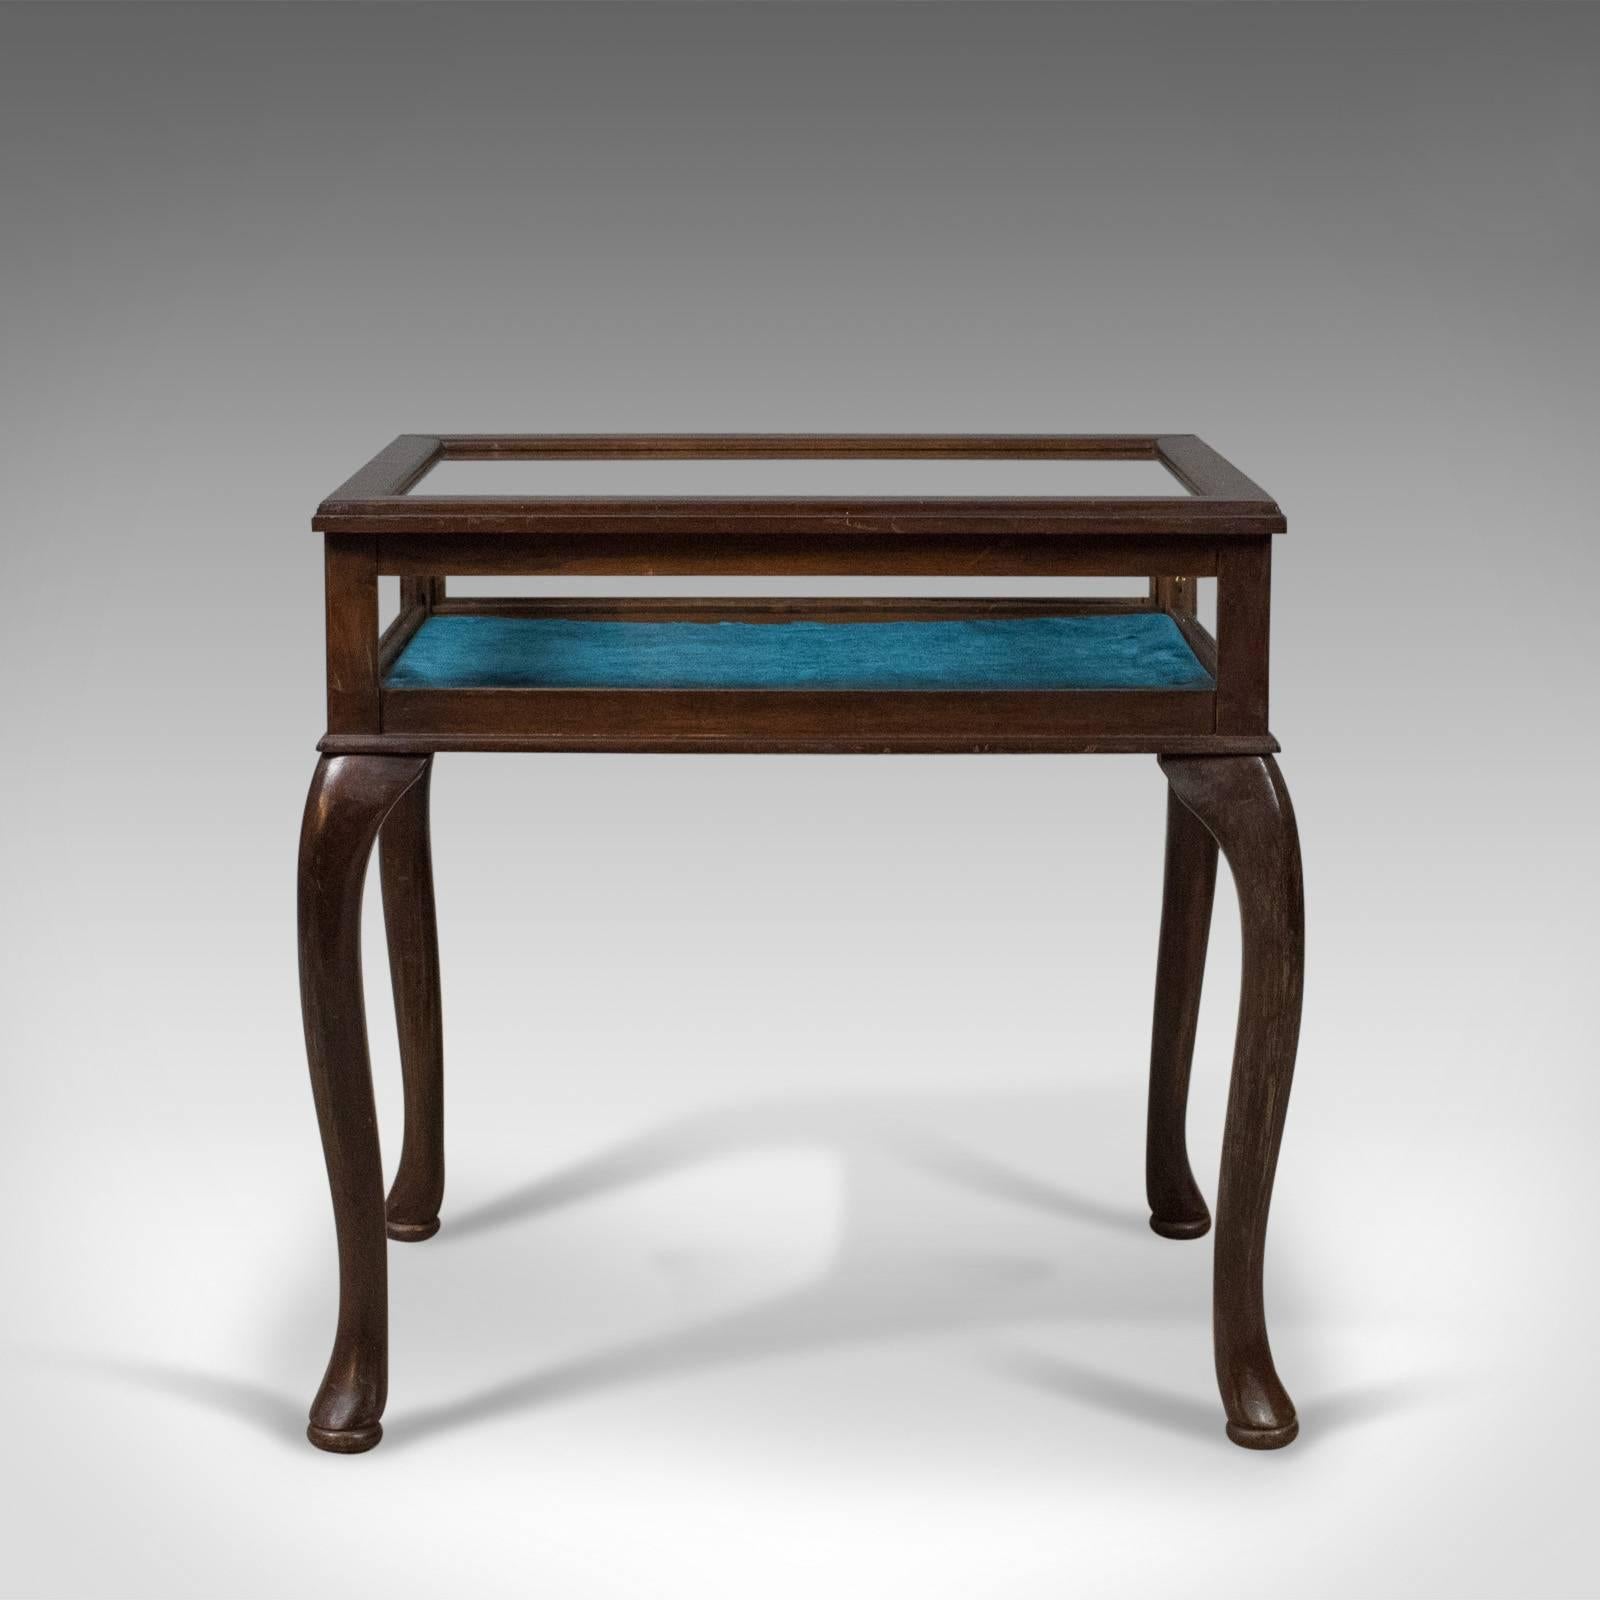 This is a bijouterie, glazed, display table in mahogany and dating to the late 20th century.

Dark waxed finish to the solid mahogany case
Glazed all round for excellent light distribution
Lid lifts on solid brass hinges with the benefit of a